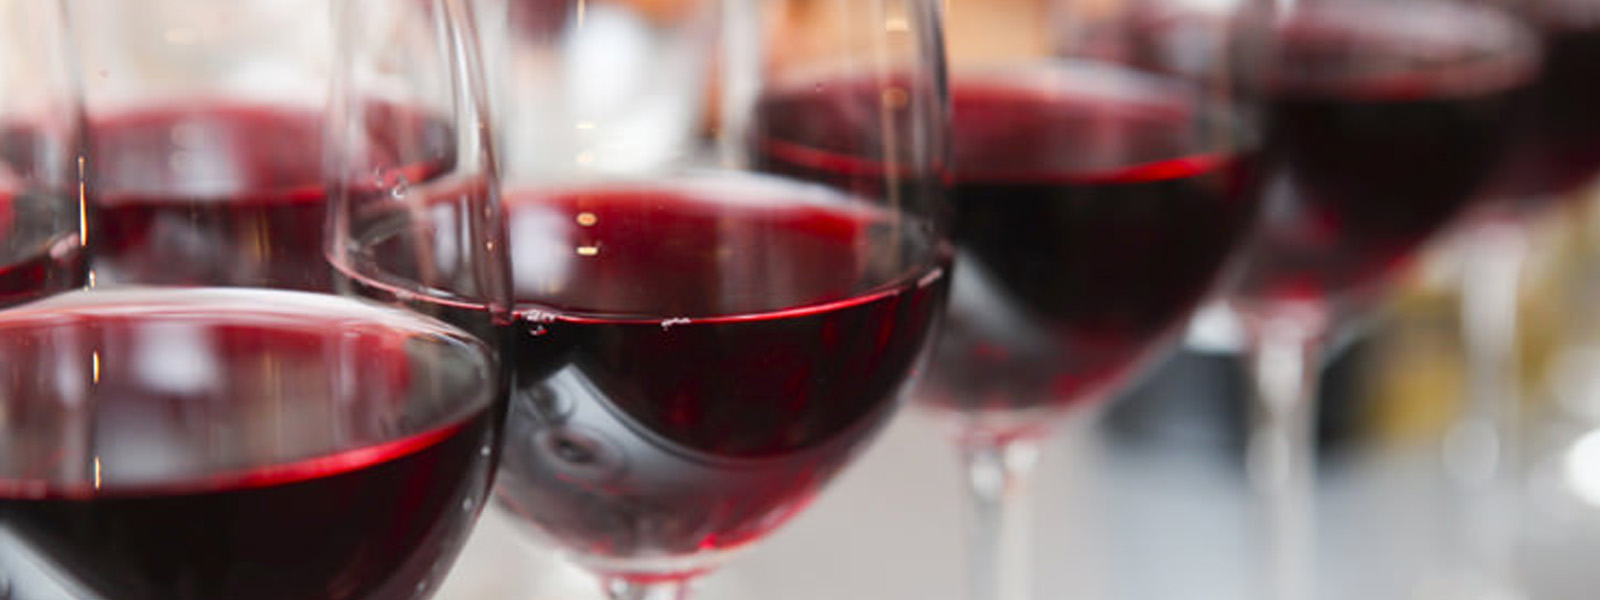 New study reveals more red wine benefits